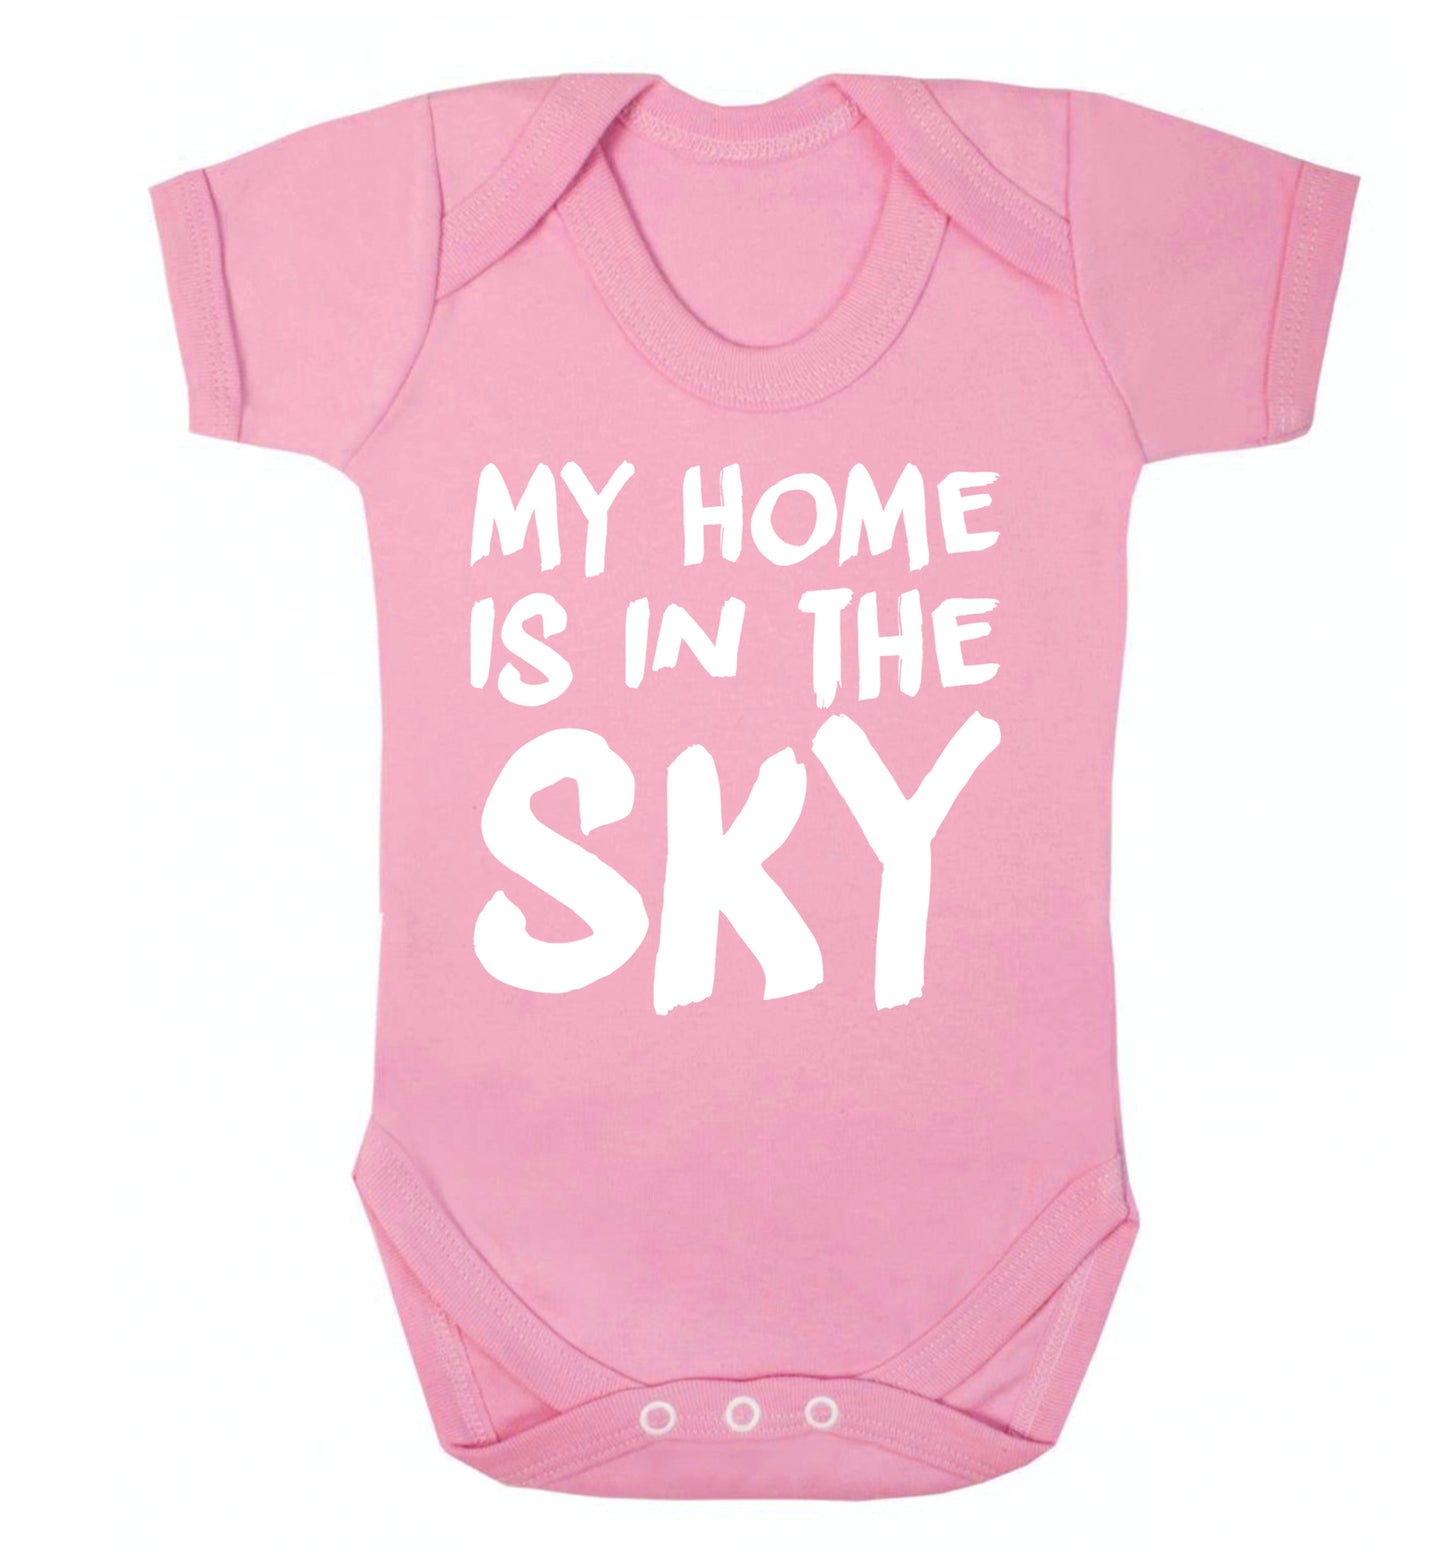 My home is in the sky Baby Vest pale pink 18-24 months